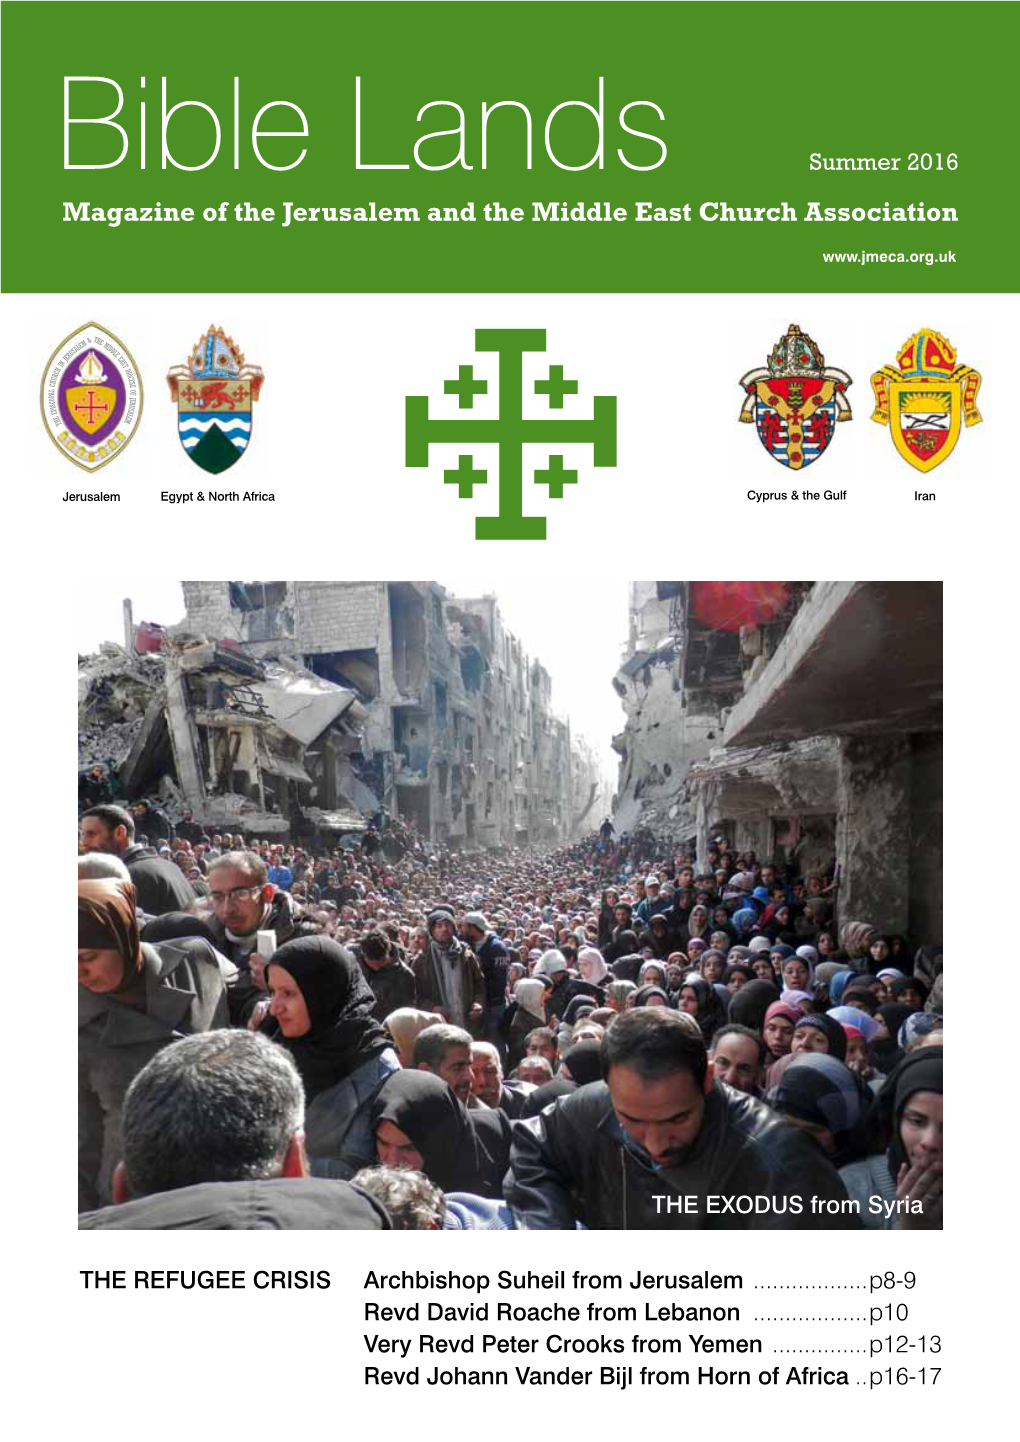 Magazine of the Jerusalem and the Middle East Church Association